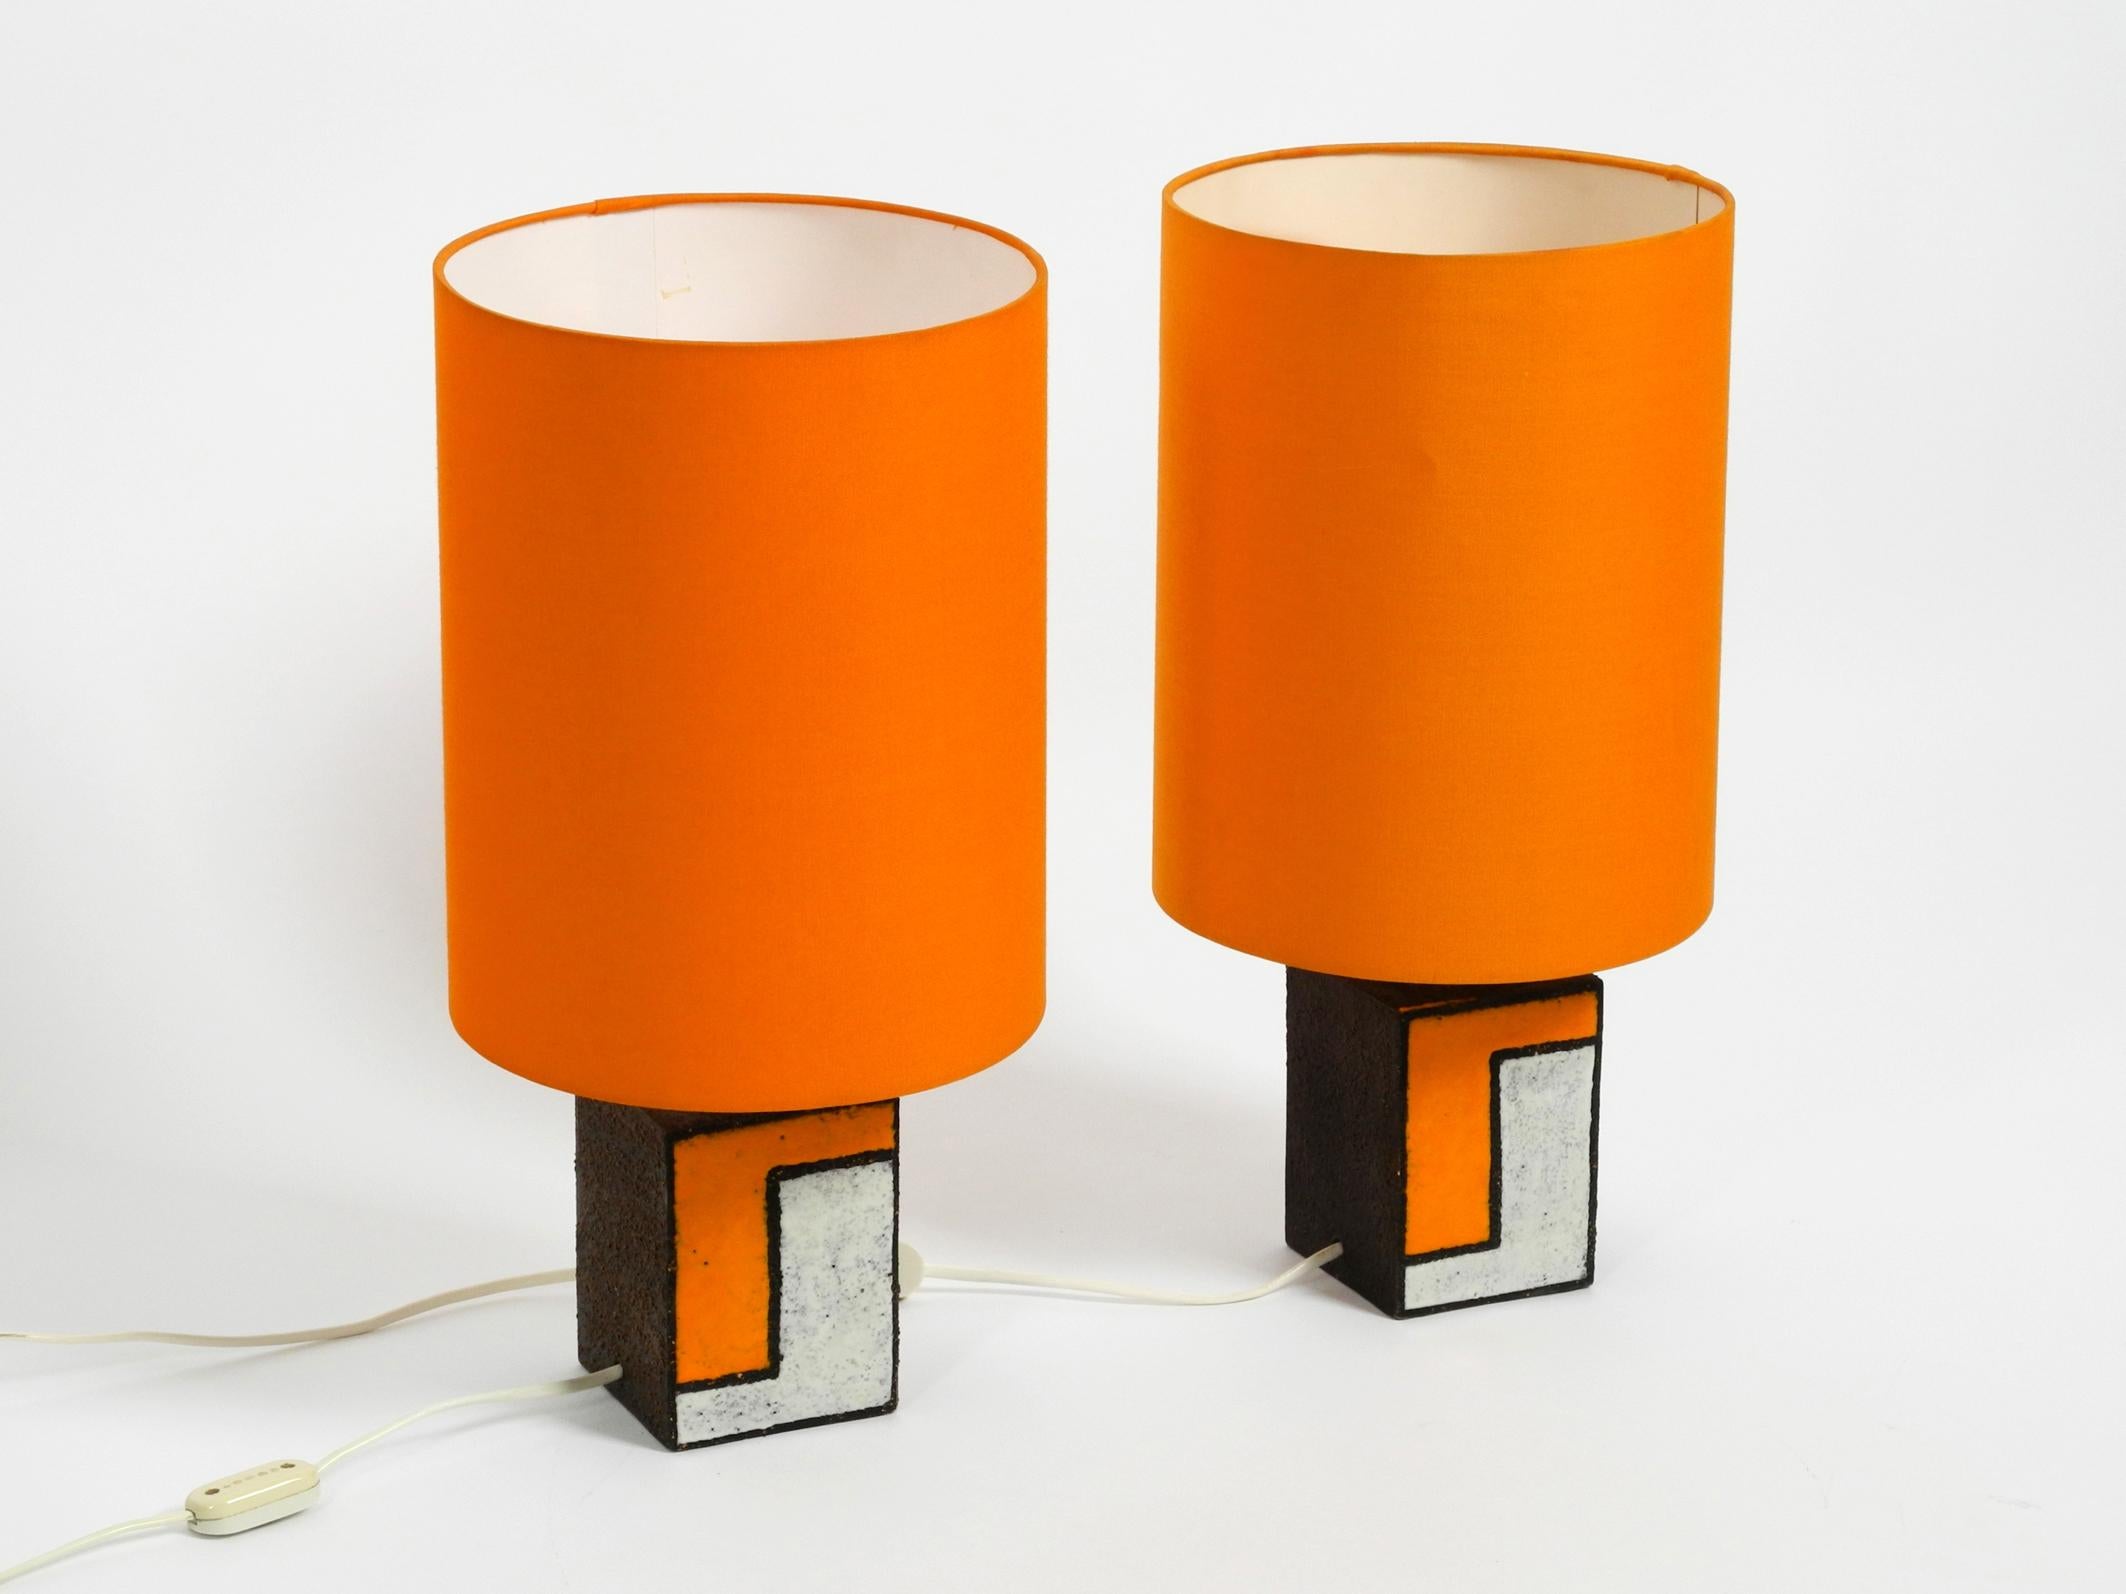 Two very nice 1950s ceramic table lamps with round orange fabric shades.
Great mid century design from Italy. Both with labels 